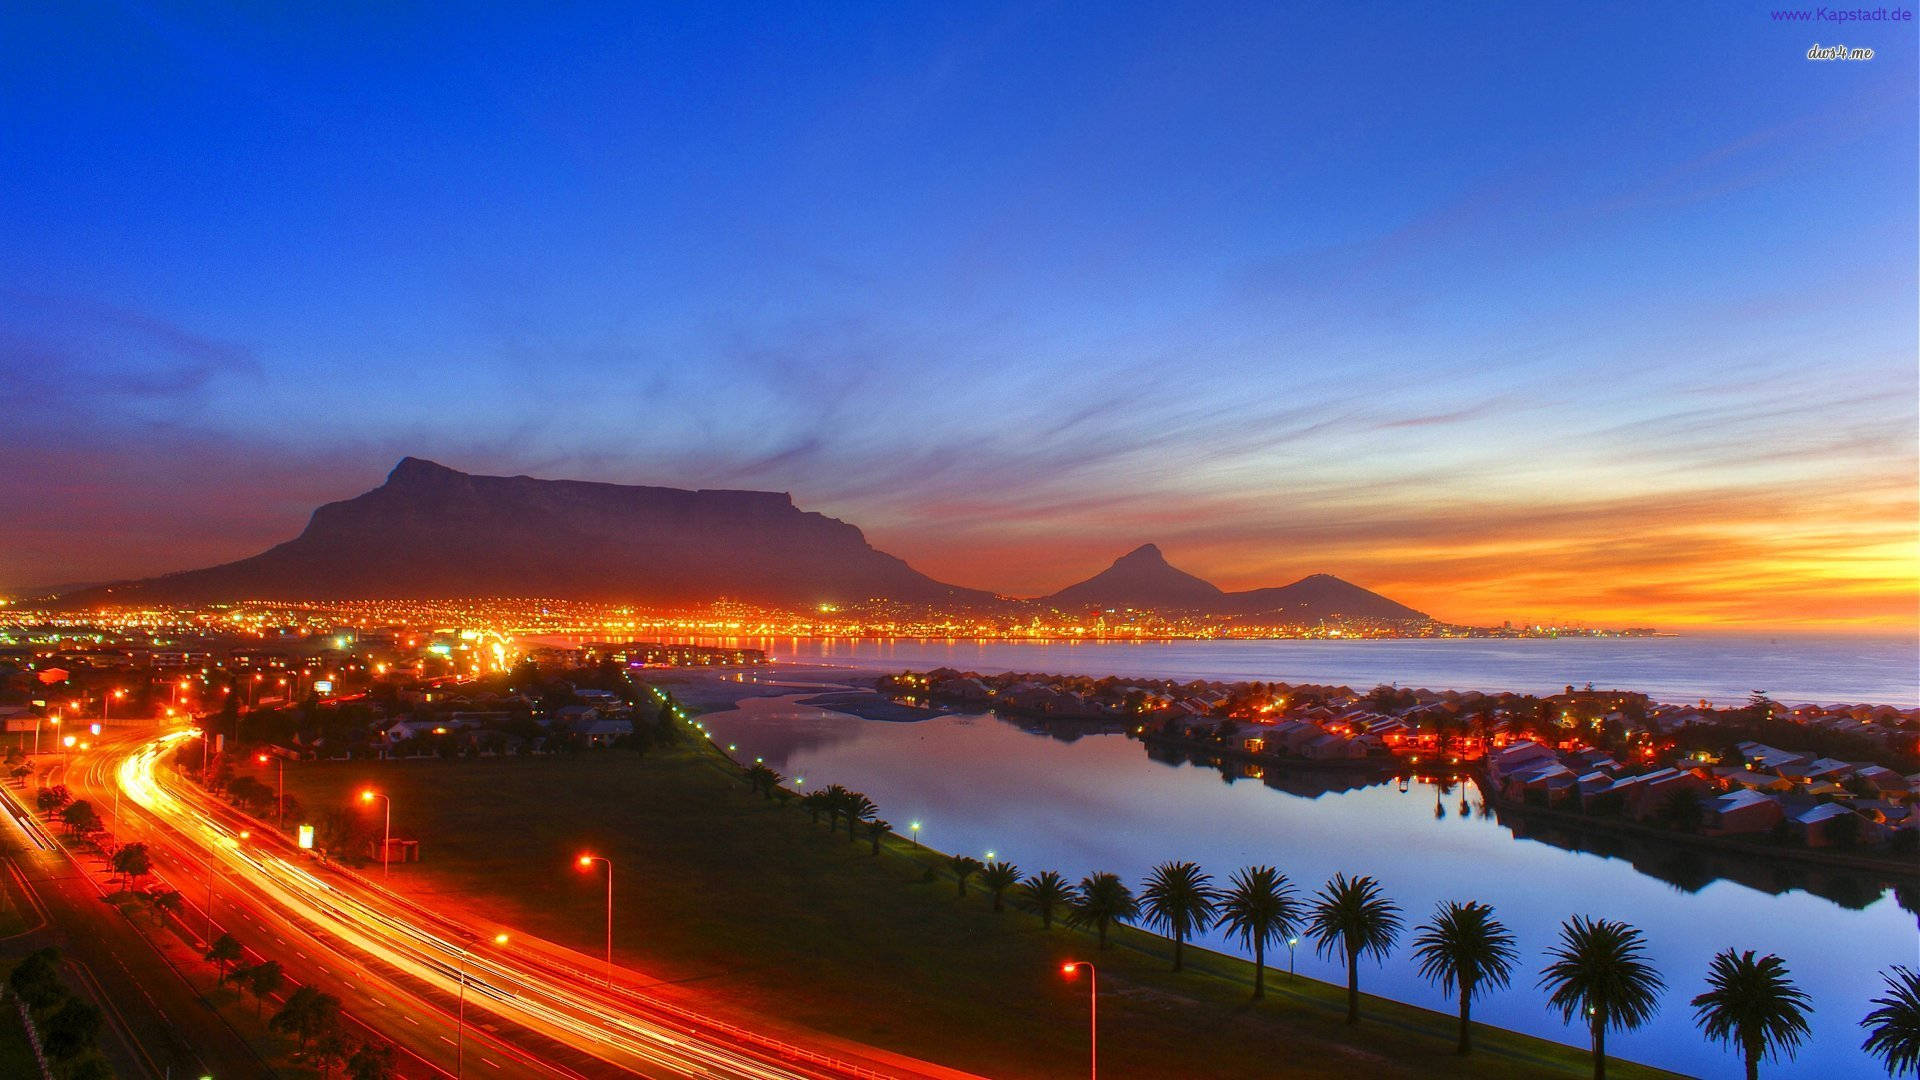 500 Cape Town Pictures Stunning  Download Free Images on Unsplash